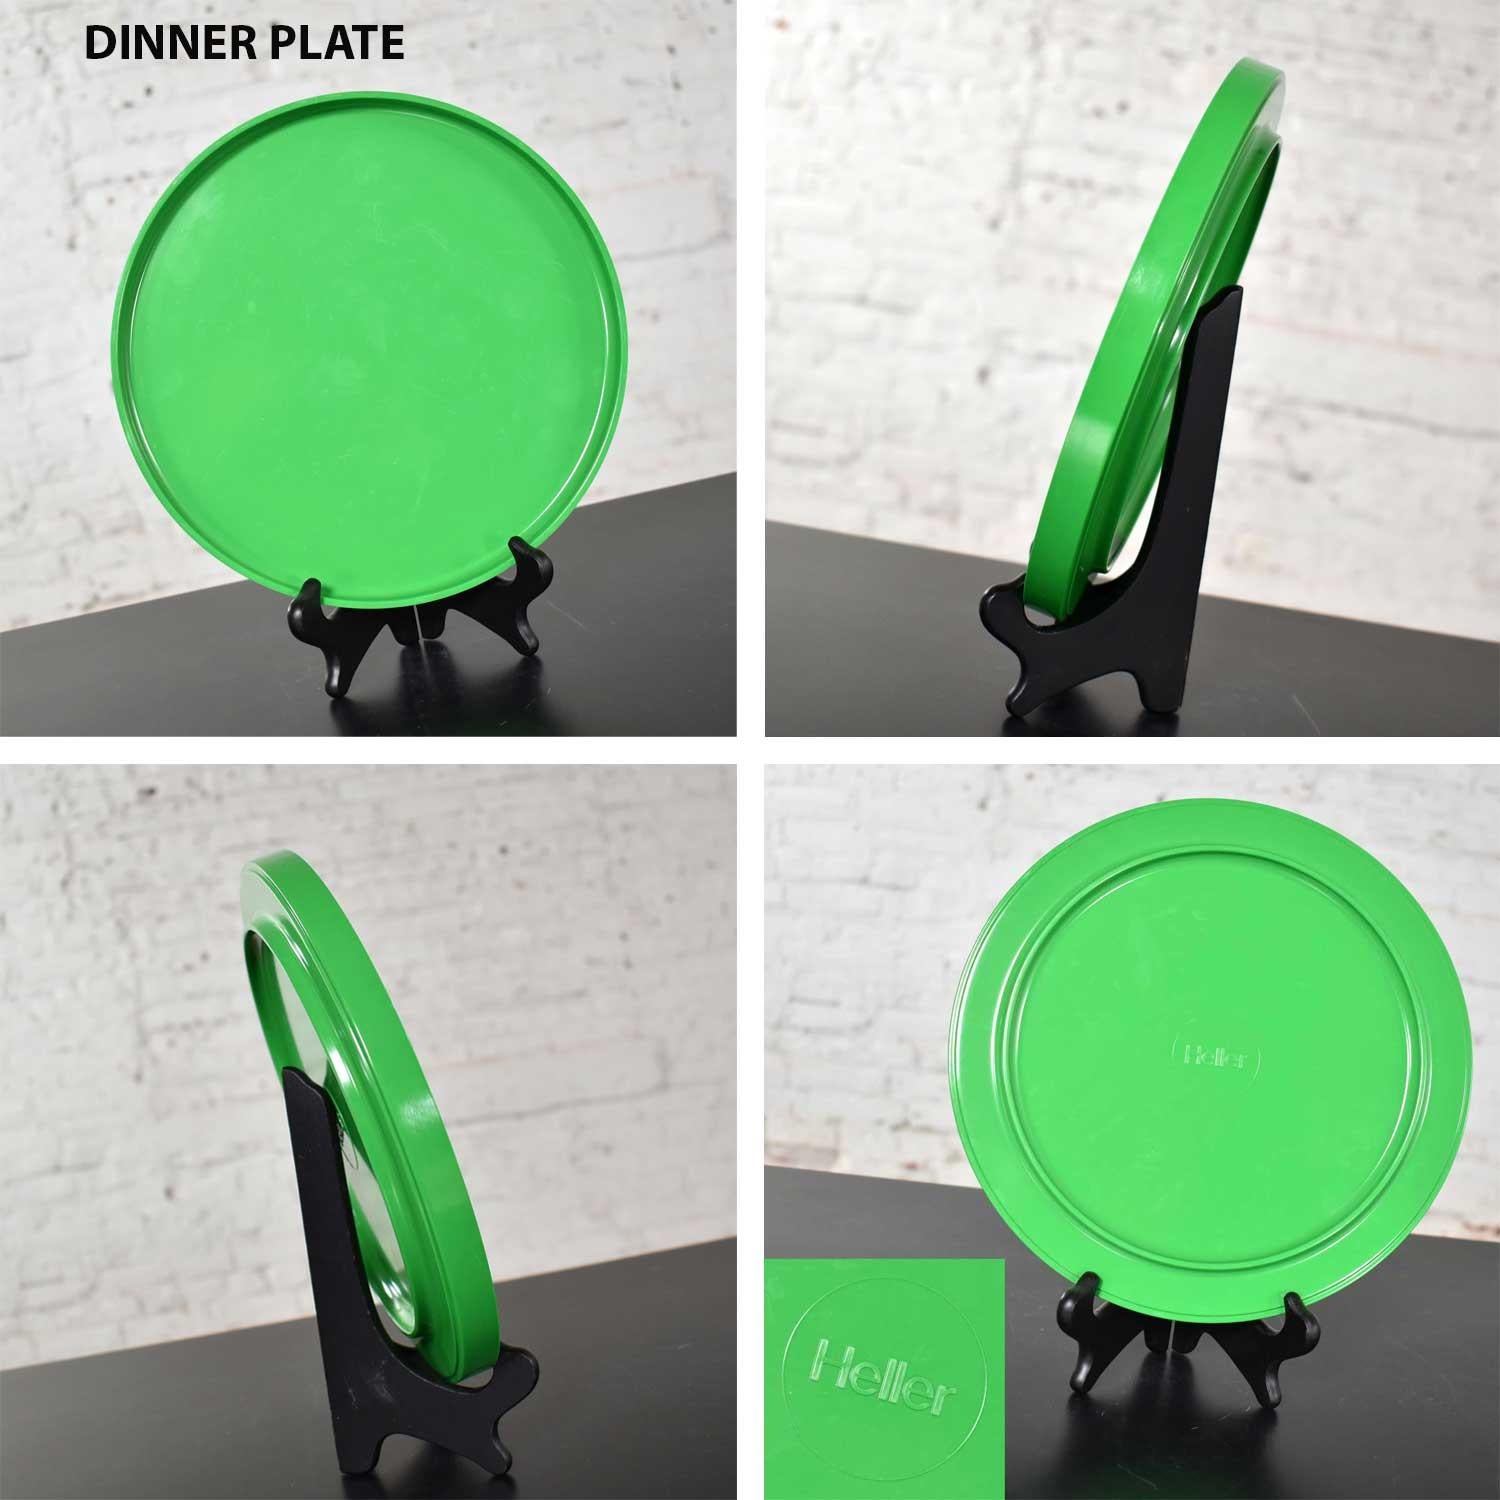 Mid-Century Modern Heller Dinnerware by Lella & Massimo Vignelli in Kelly Green 58 Pieces & Napkins